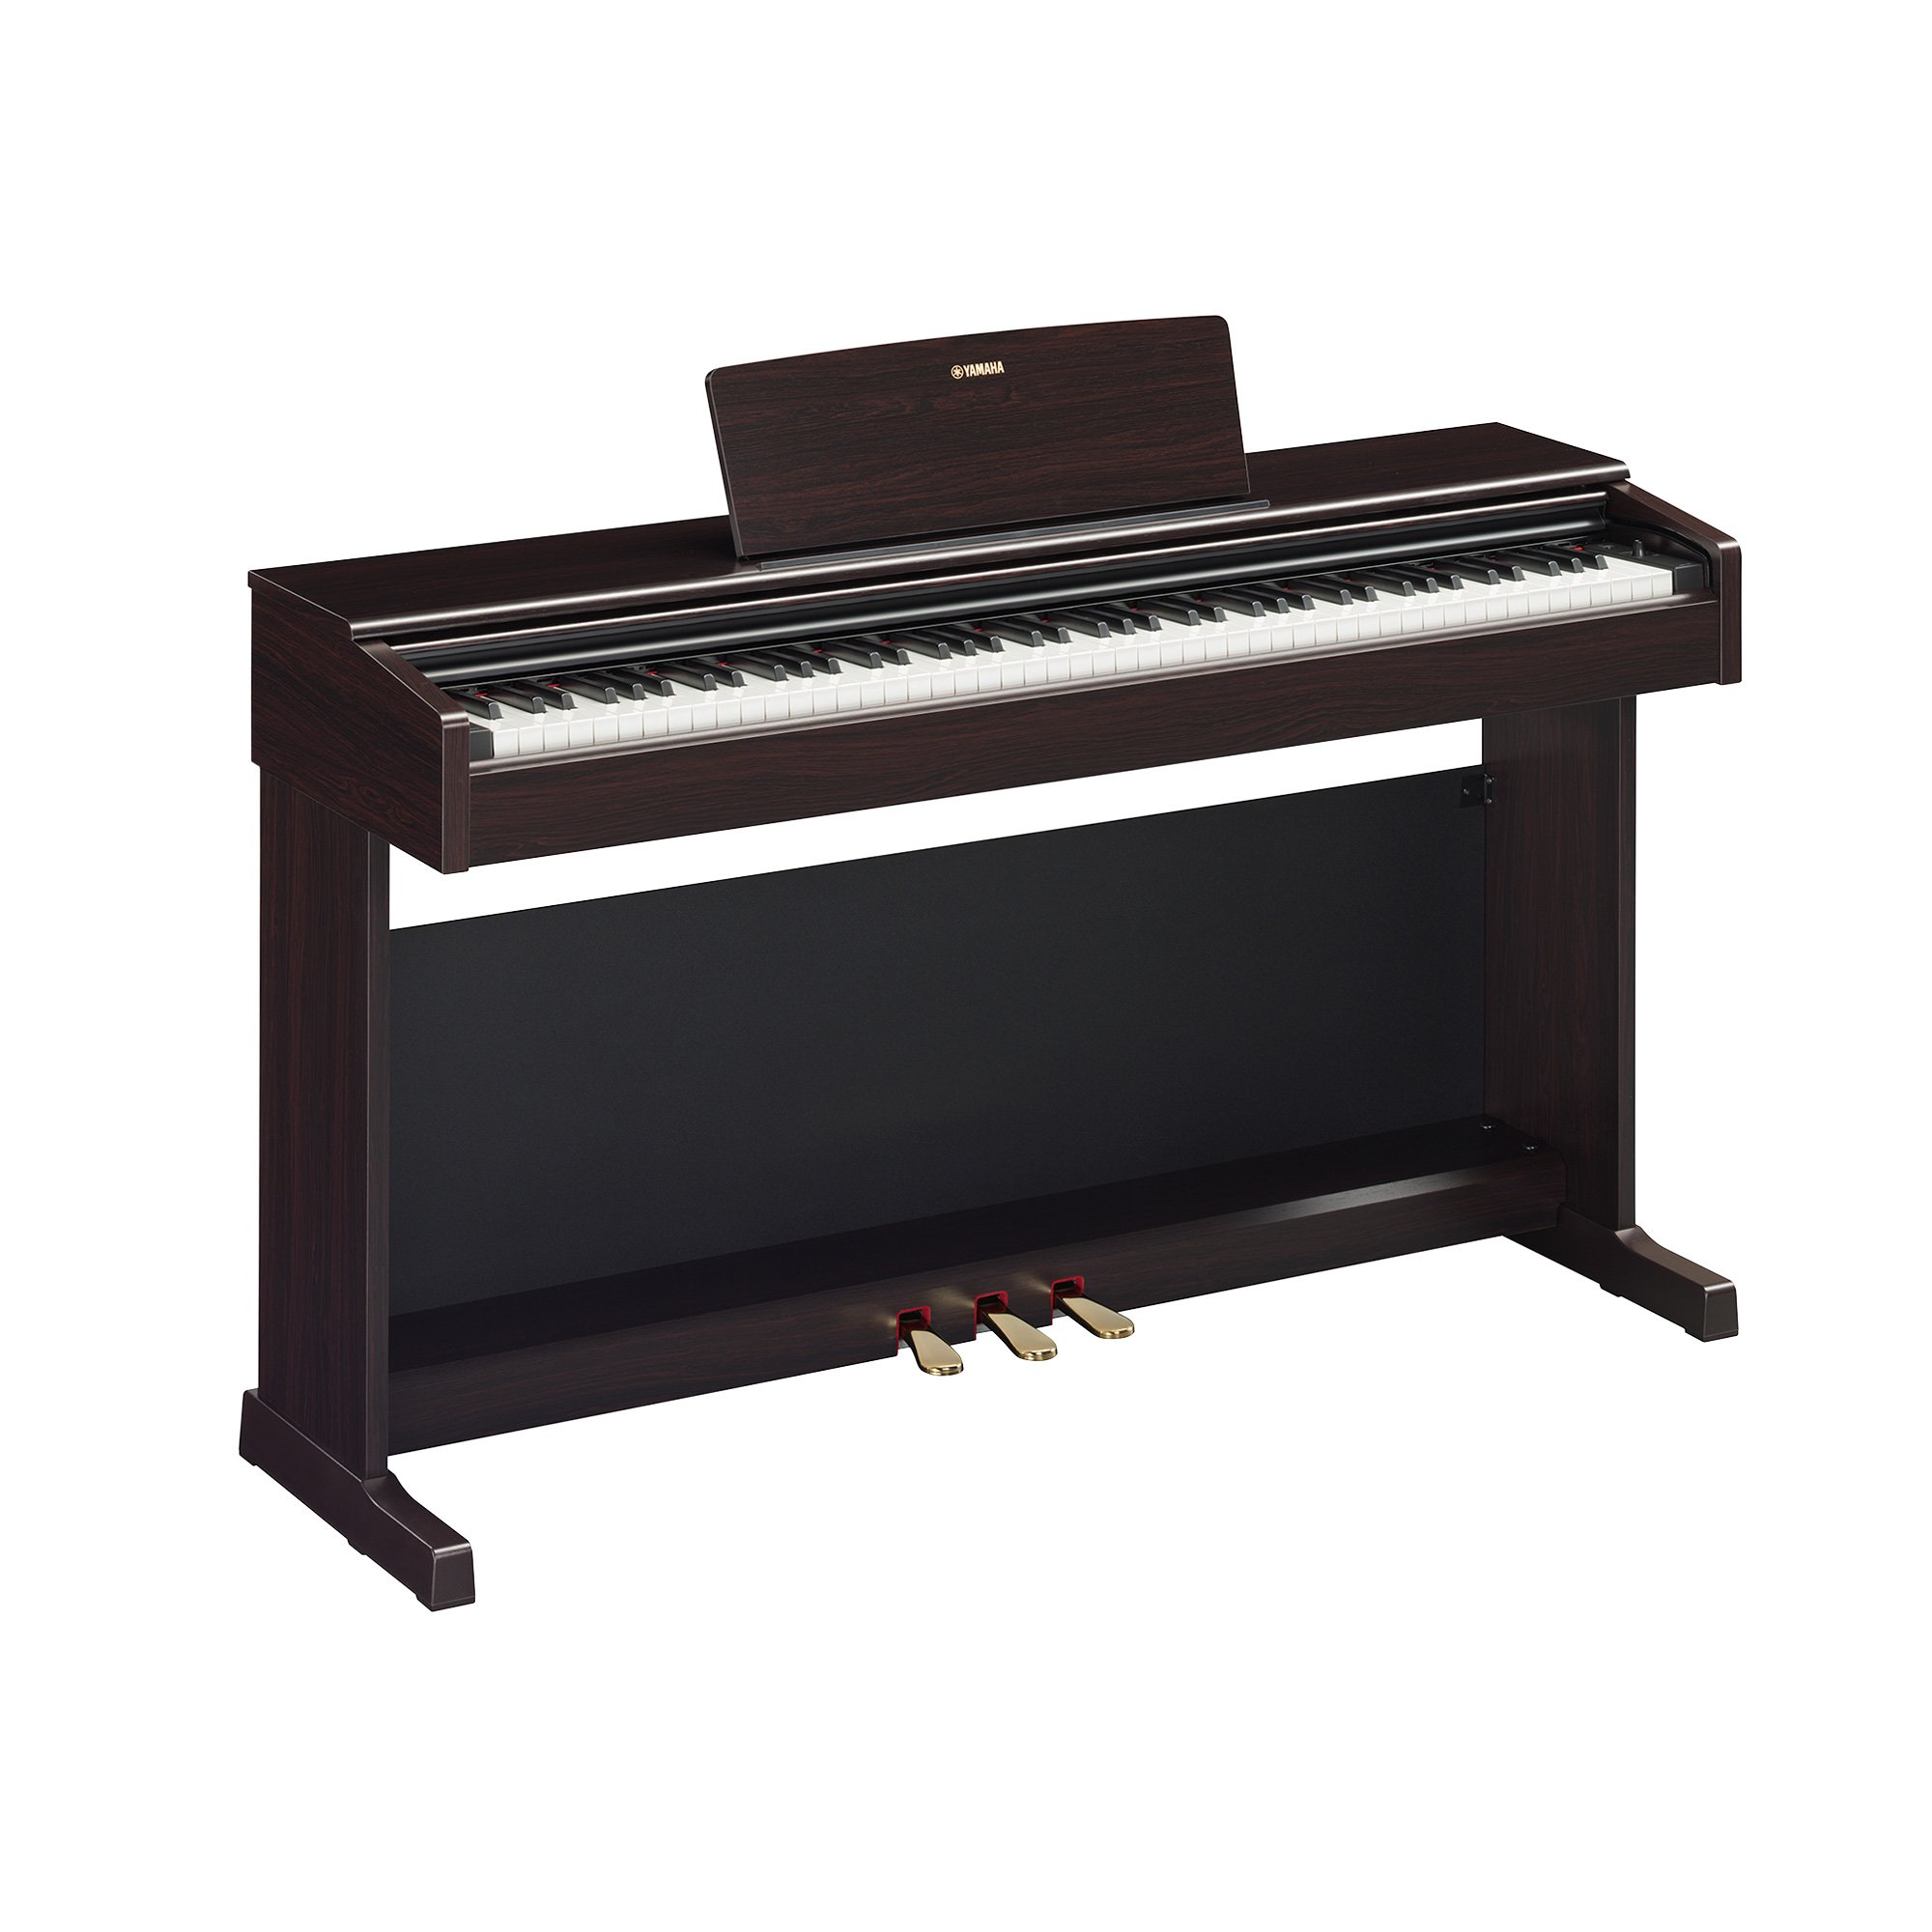 ARIUS - Pianos - Musical Instruments - Products - Yamaha - Canada 